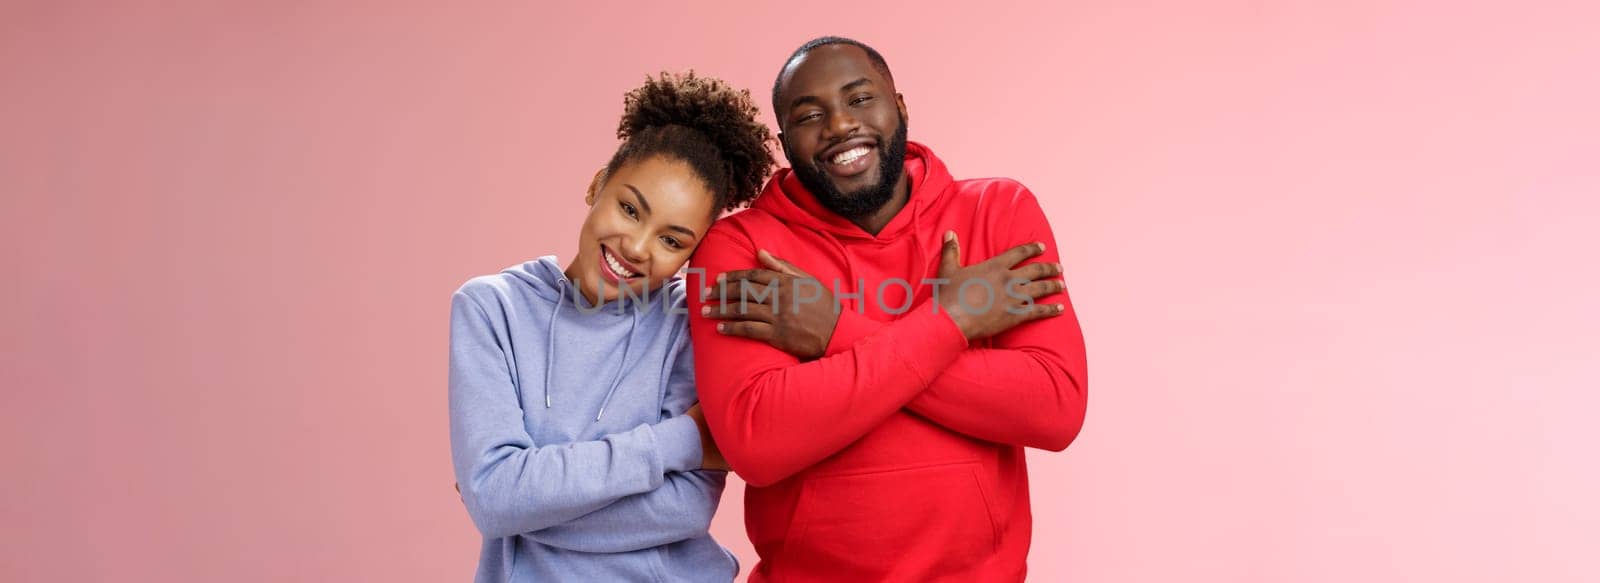 Lifestyle. Charming happy sincere african-american family guy girl relationship embracing cross arms chest hugging each other girlfriend lean boyfriend shoulder lovely couply smiling feel love warmth.